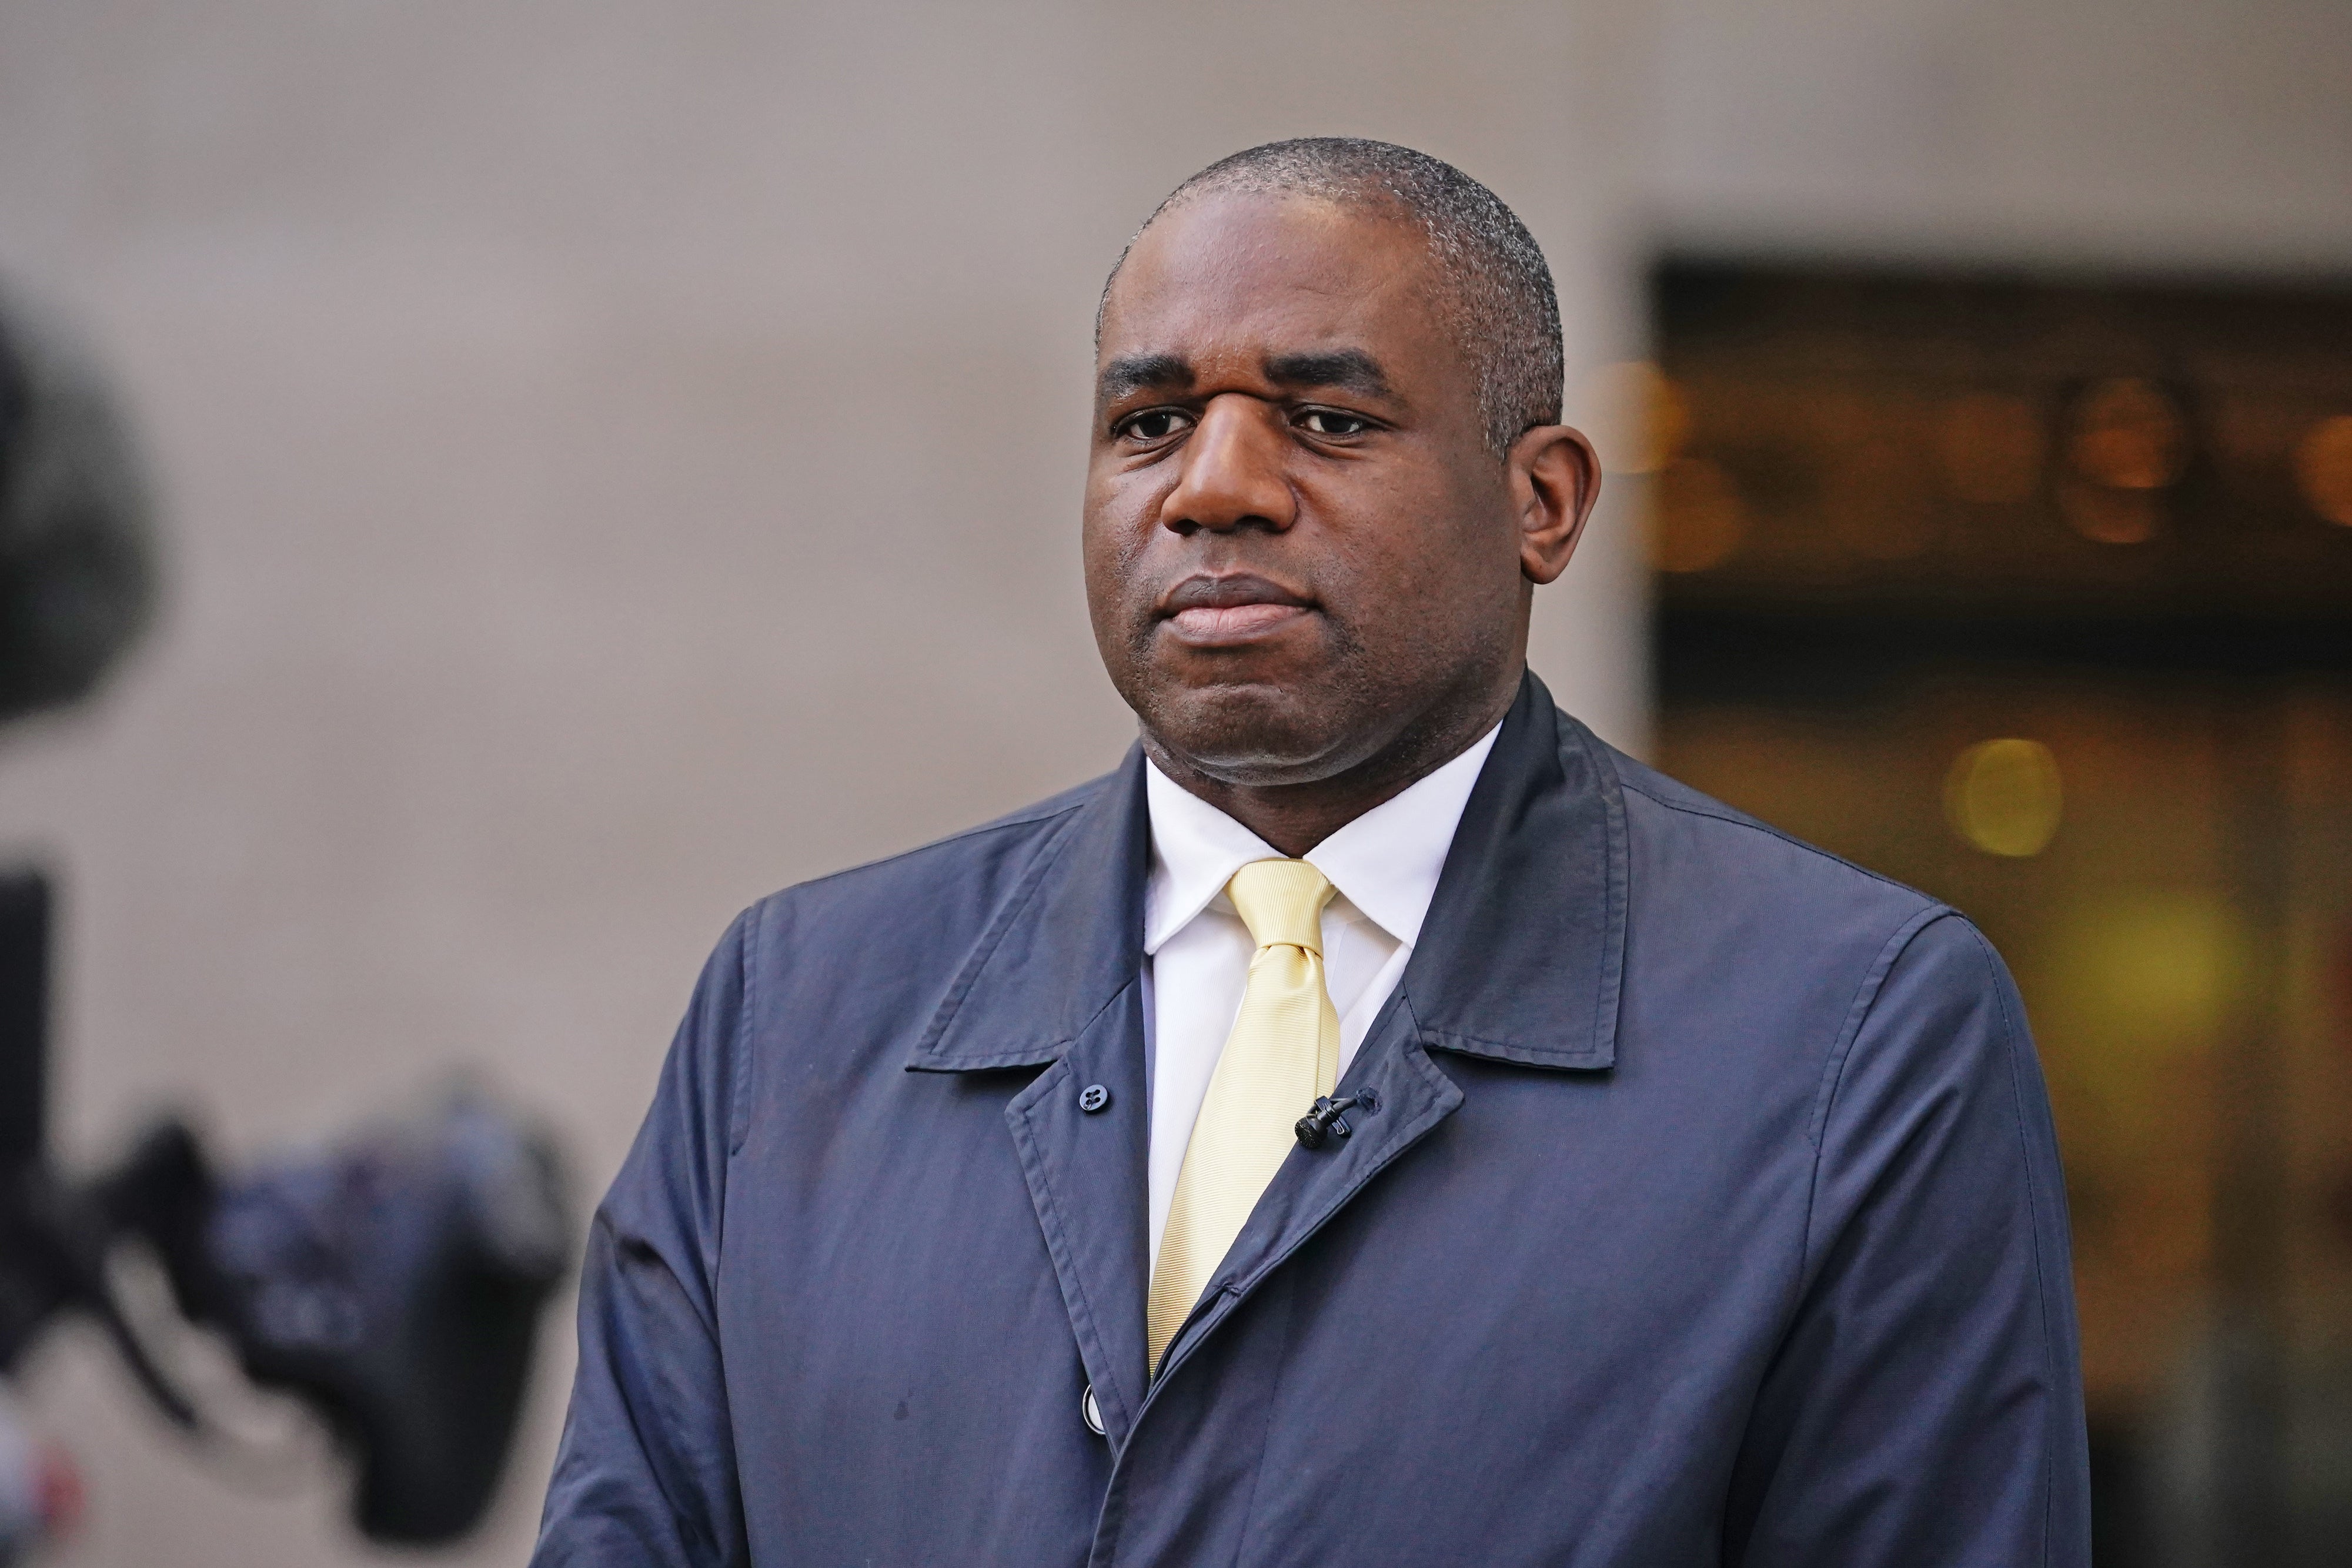 Shadow foreign secretary David Lammy has flown to Afghanistan to see for himself conditions in the country where millions are facing starvation following the chaotic withdrawal of foreign forces last year (Aaron Chown/PA)